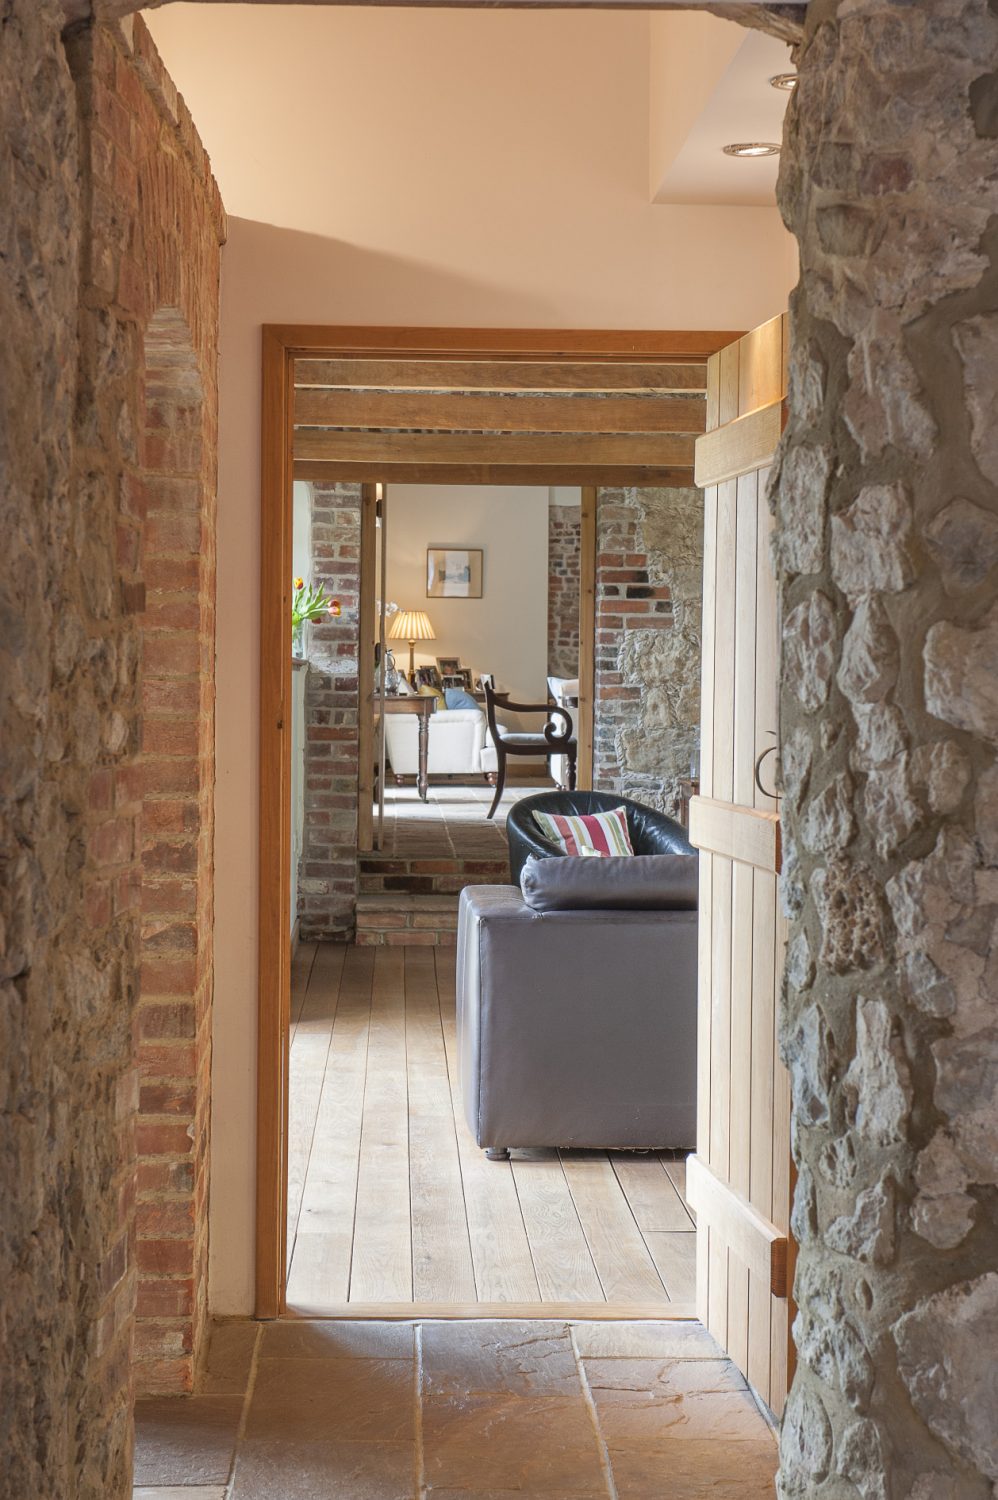 Perpendicular to the kitchen, a short corridor leads to the sitting and dining room